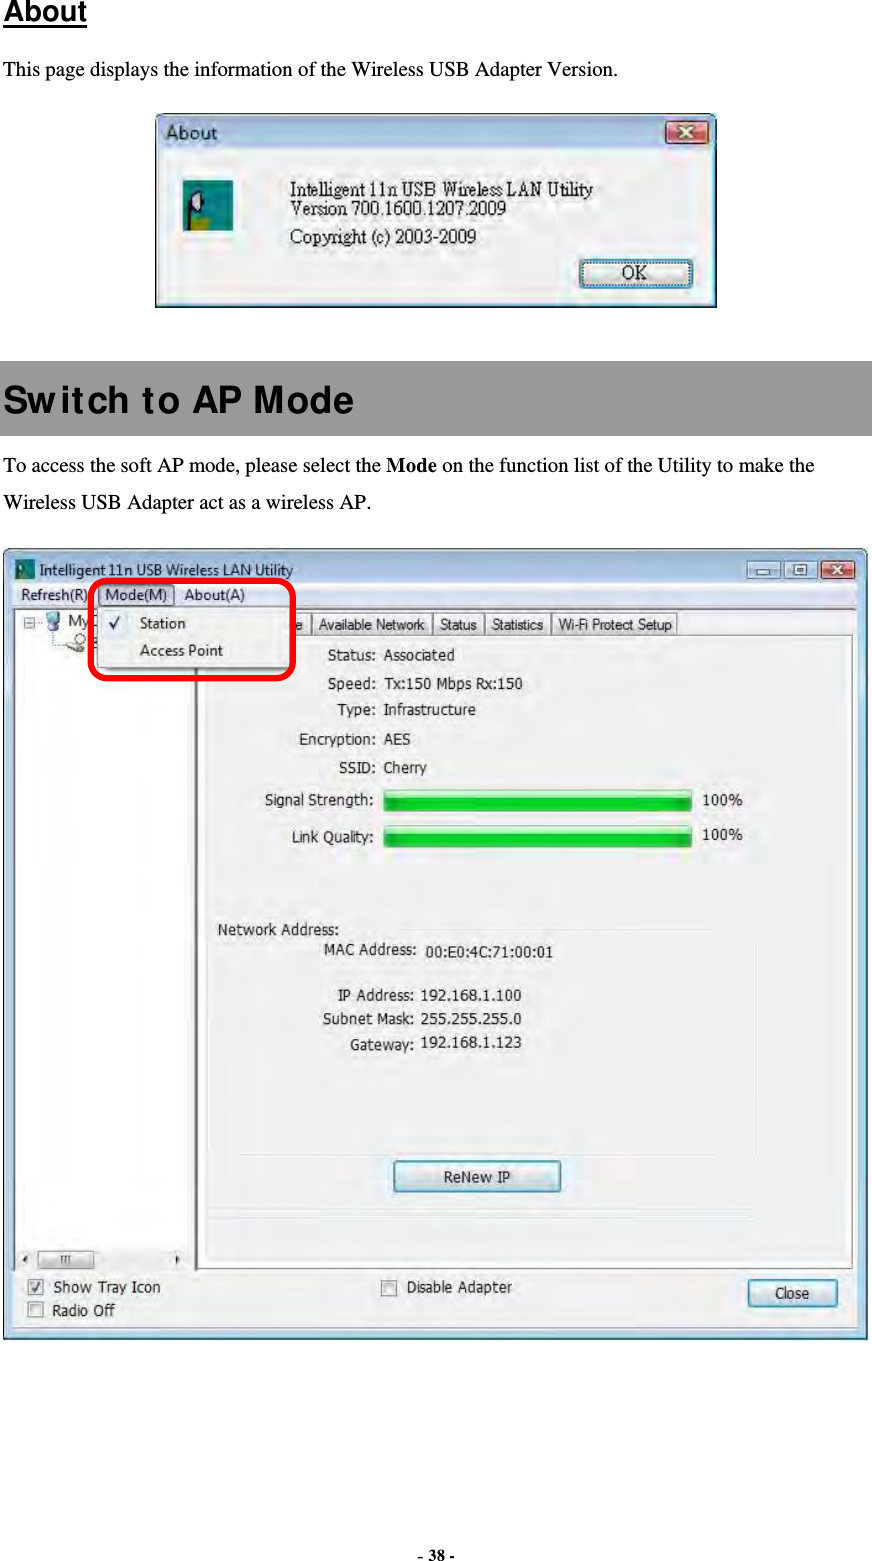  - 38 - About This page displays the information of the Wireless USB Adapter Version.   Switch to AP Mode To access the soft AP mode, please select the Mode on the function list of the Utility to make the Wireless USB Adapter act as a wireless AP.   